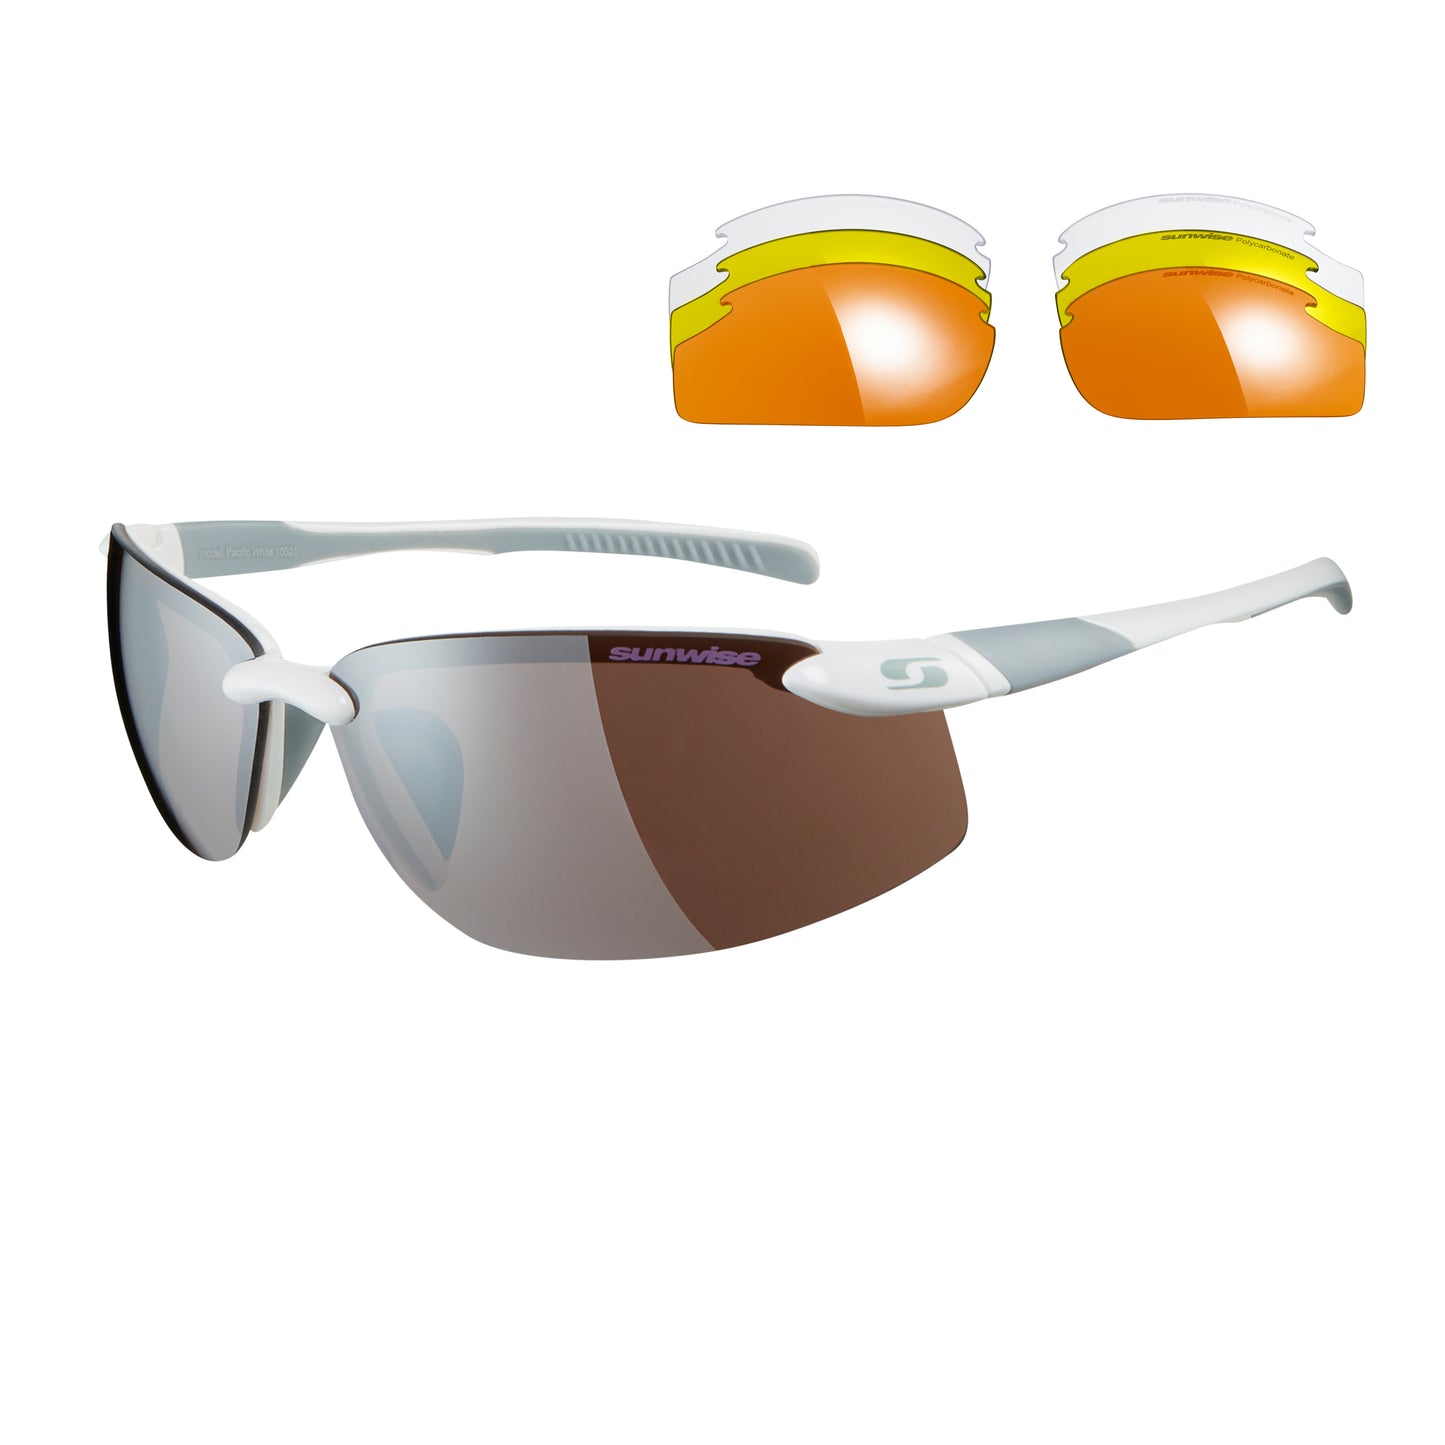 Sunwise Pacific sports sunglasses in white with interchangeable lenses